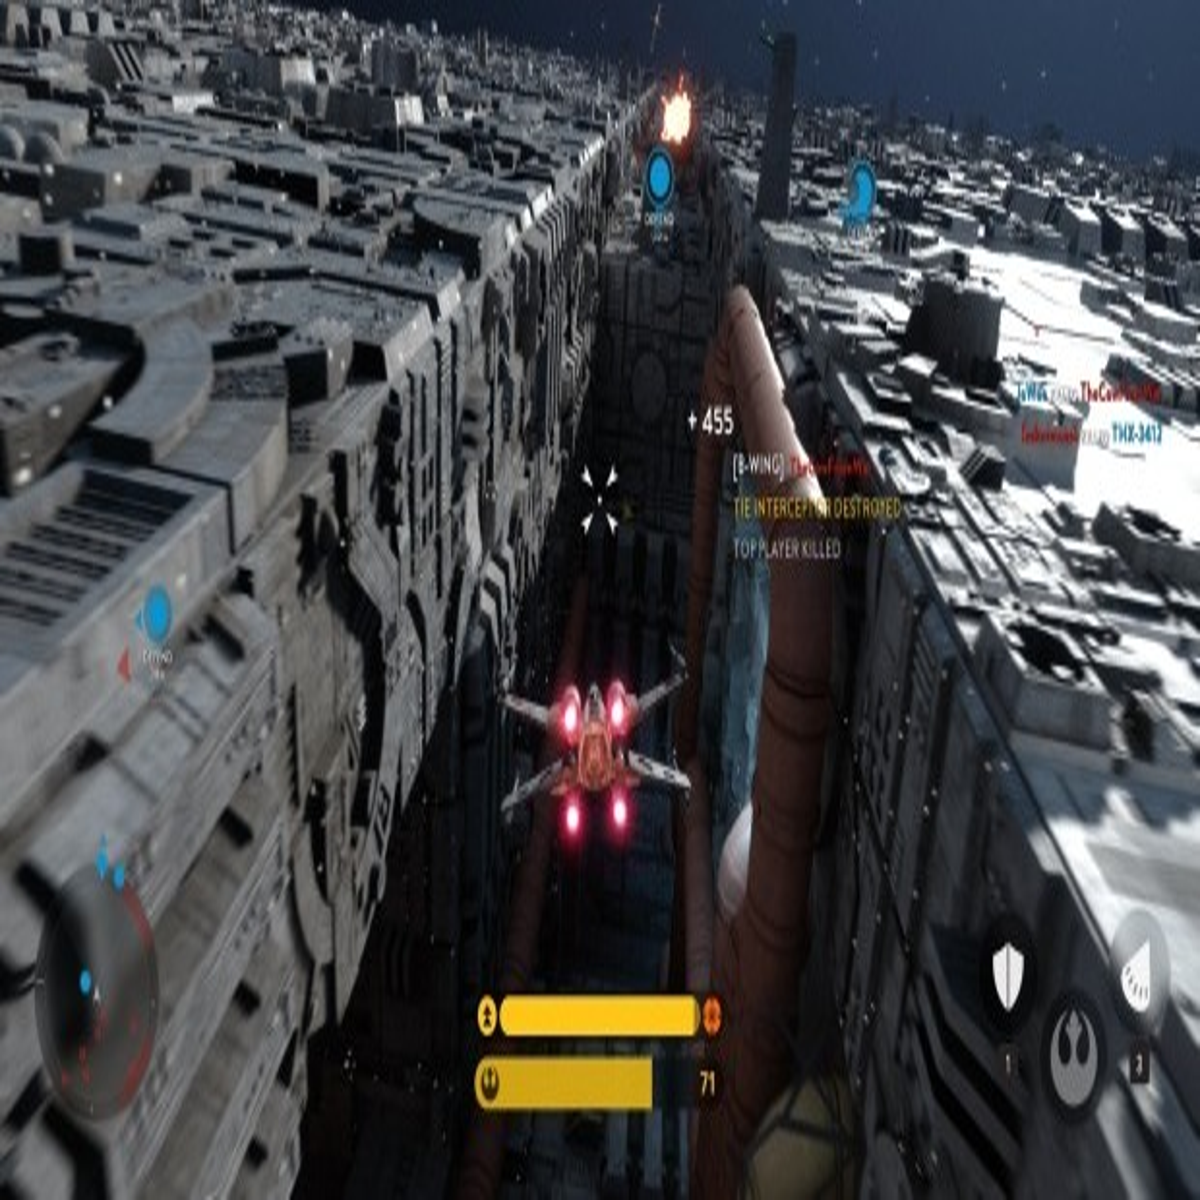 Just upgraded to the Celebration Edition, I am LOVING the game!!! : r/ StarWarsBattlefront